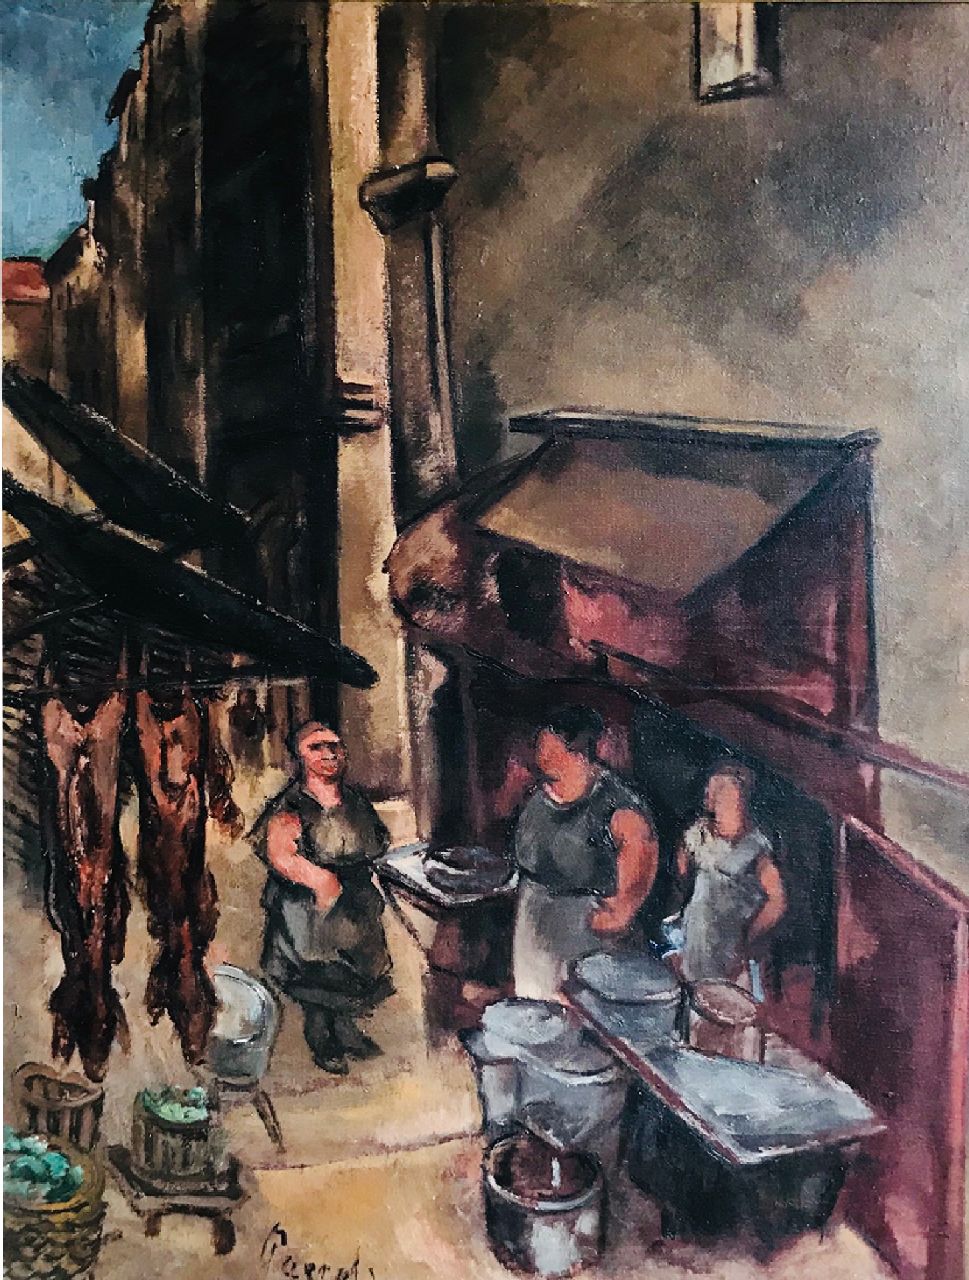 Paerels W.A.  | 'Willem' Adriaan Paerels | Paintings offered for sale | Old neighborhood with butcher and figures, oil on canvas 80.3 x 60.0 cm, signed l.l. and te dateren ca. 1922-1928